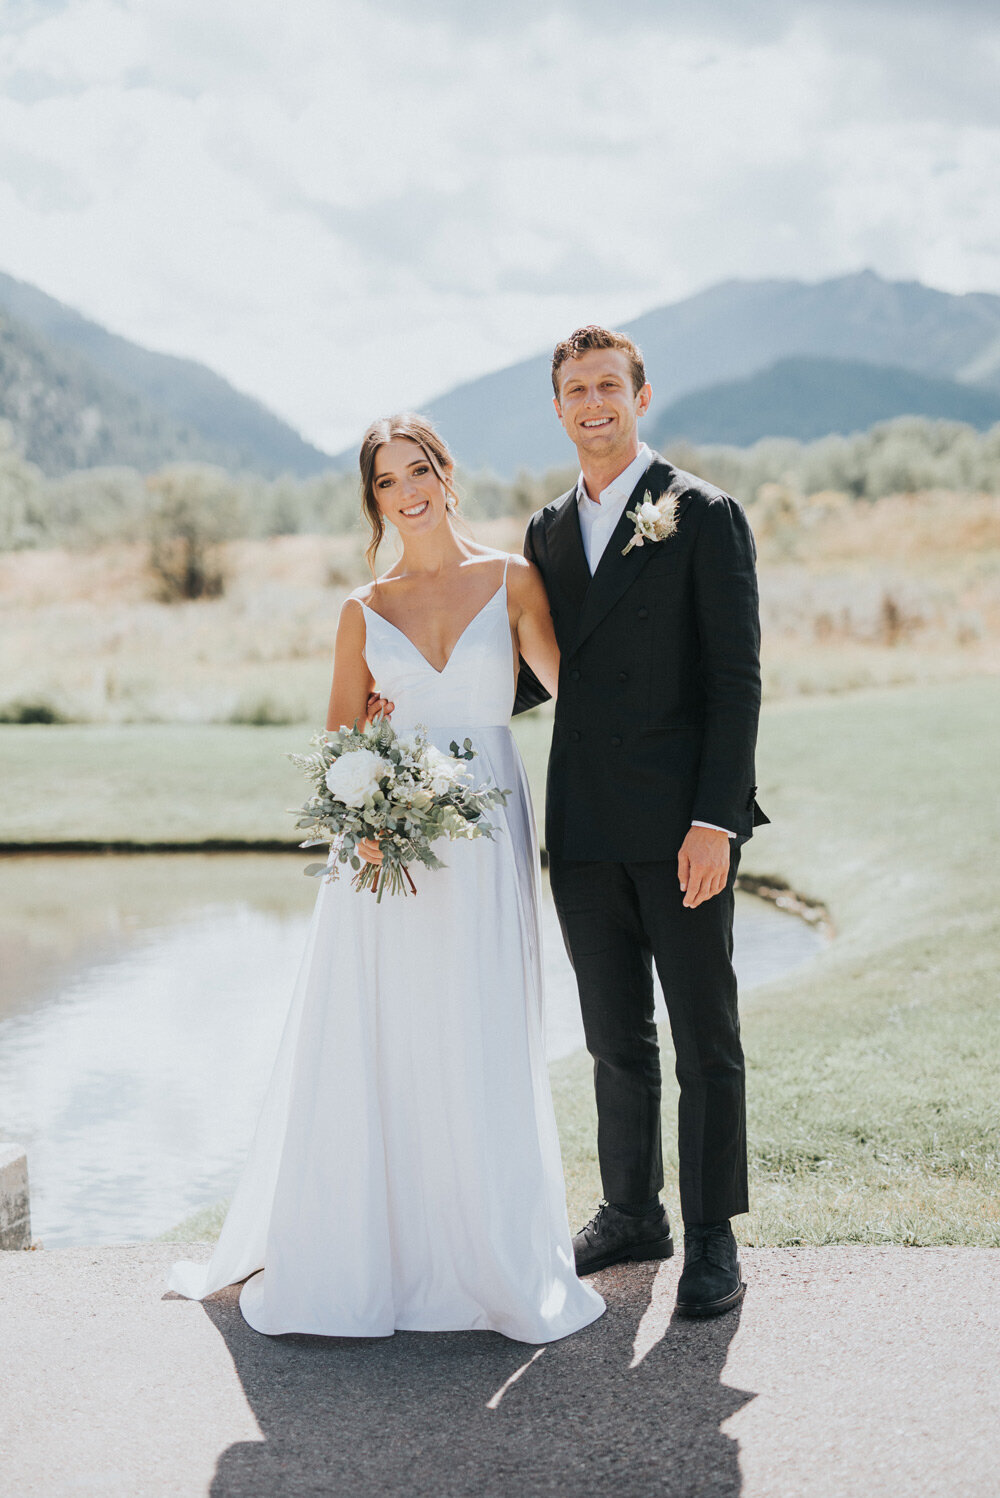 Smiling bride and groom wedding portrait with mountains in the background